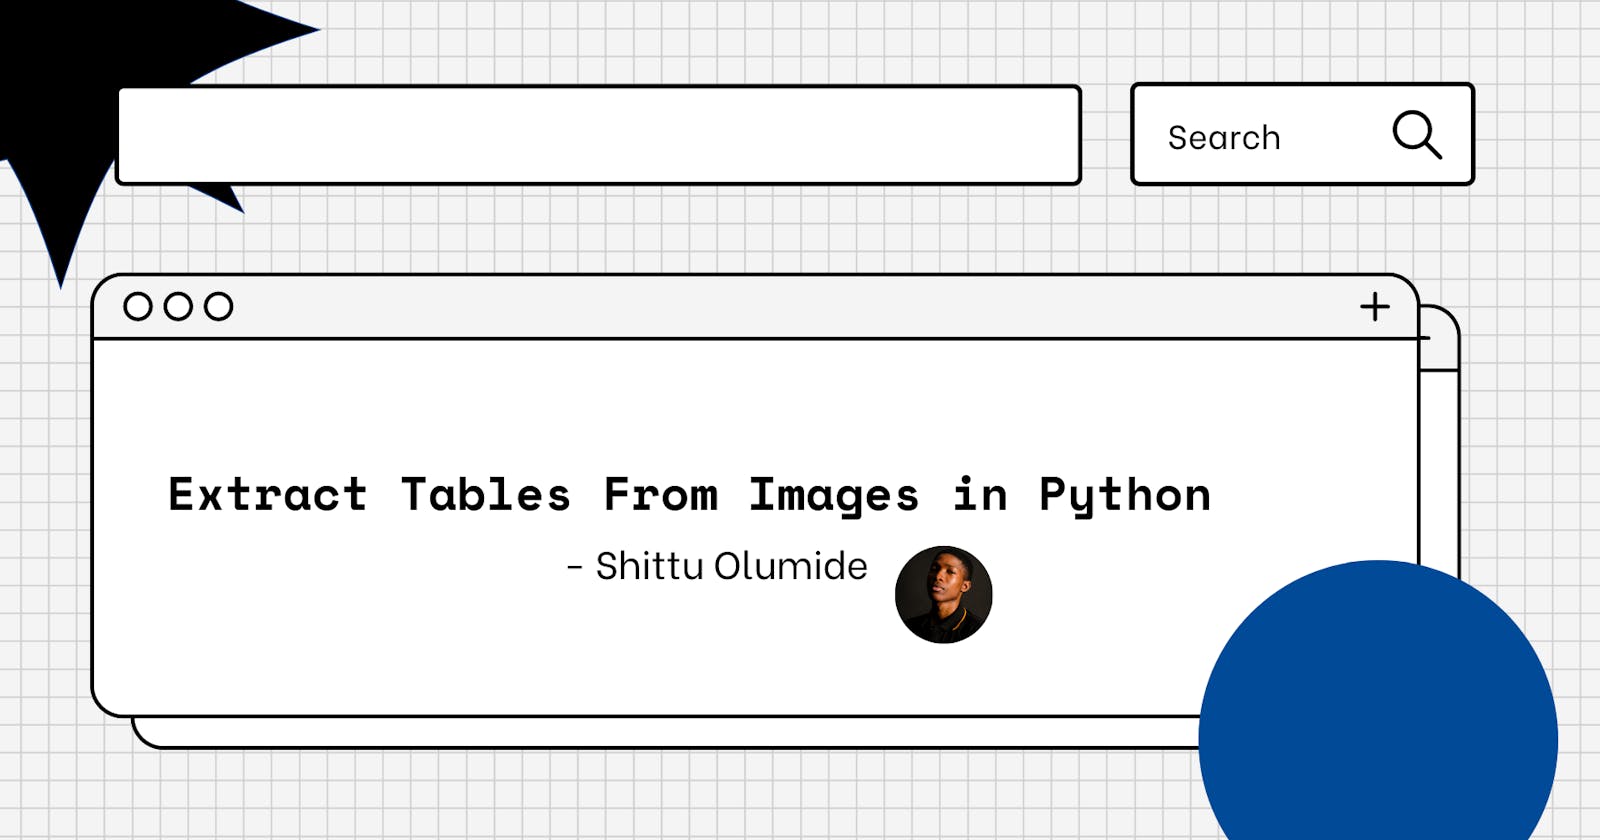 Extract Tables From Images in Python